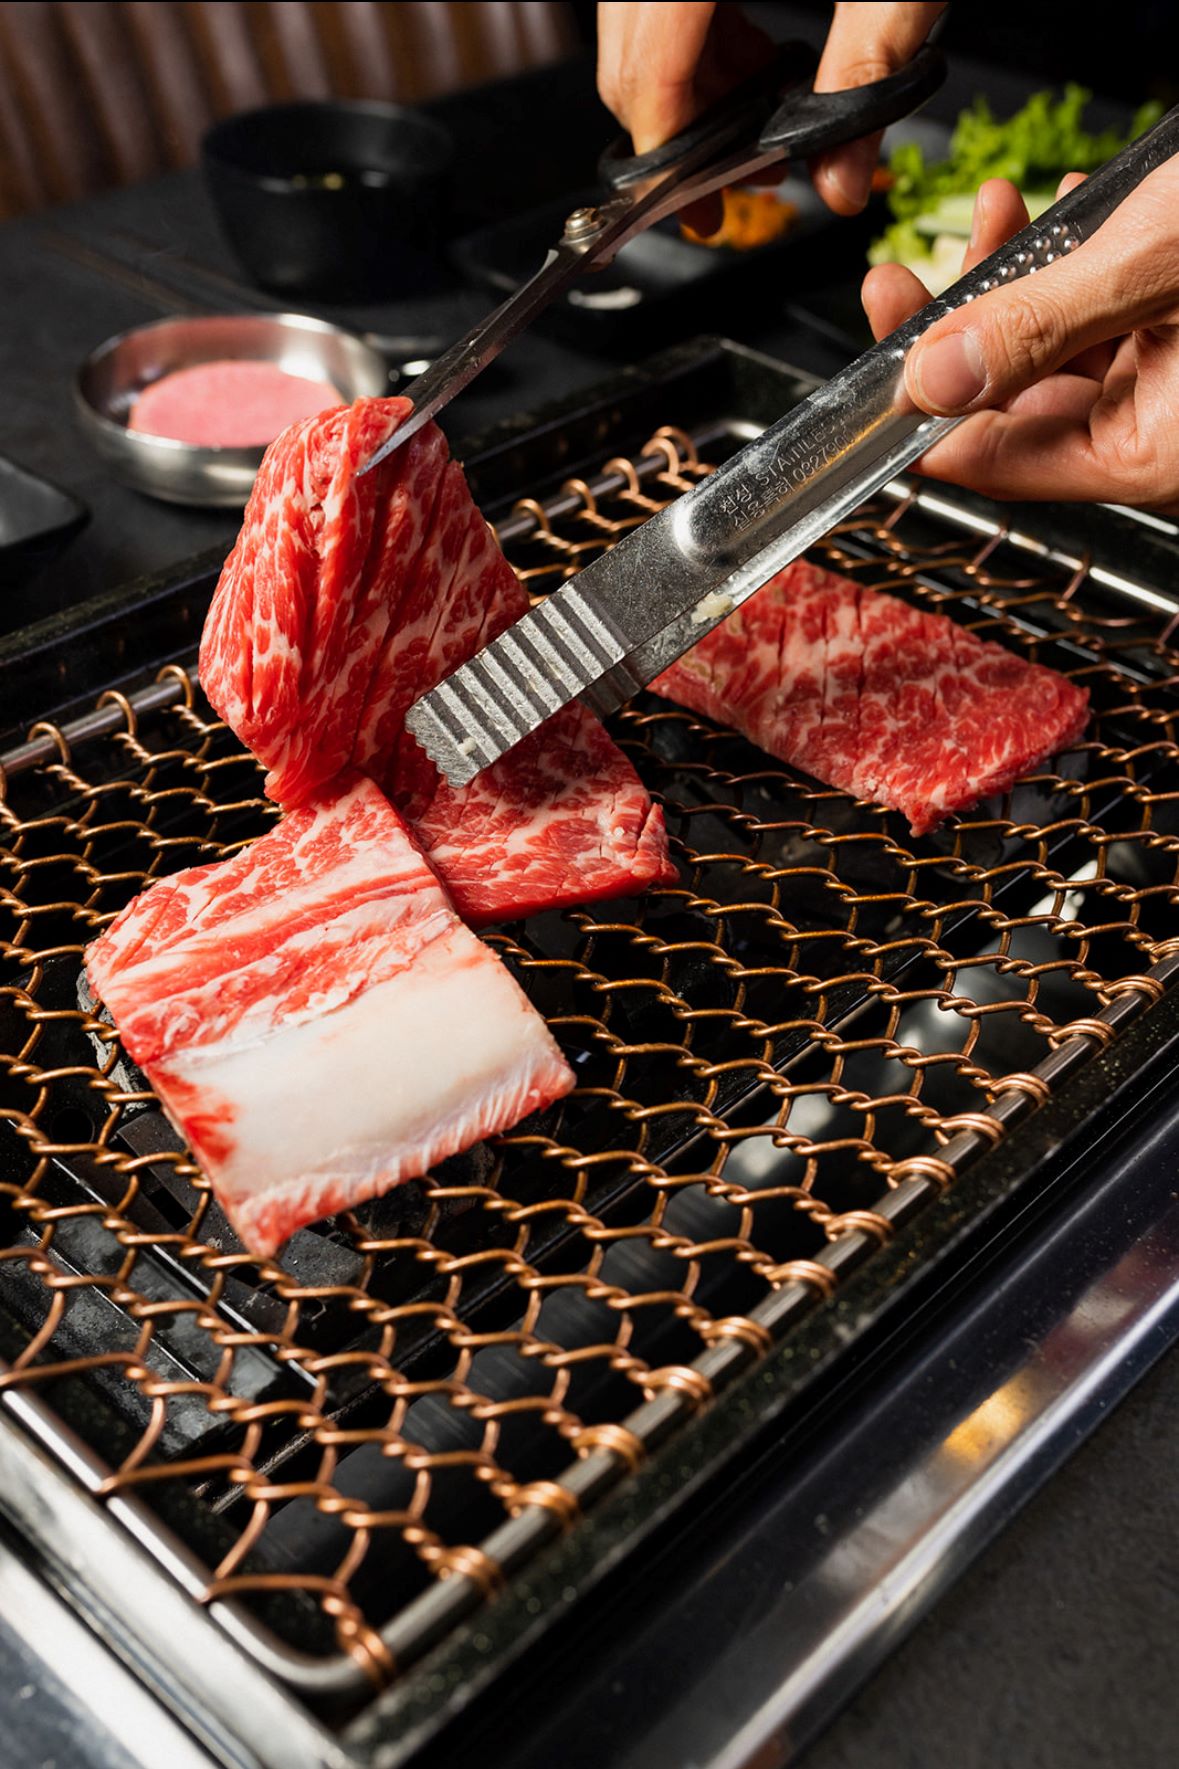 An image of meat from ORIGIN Korean BBQ